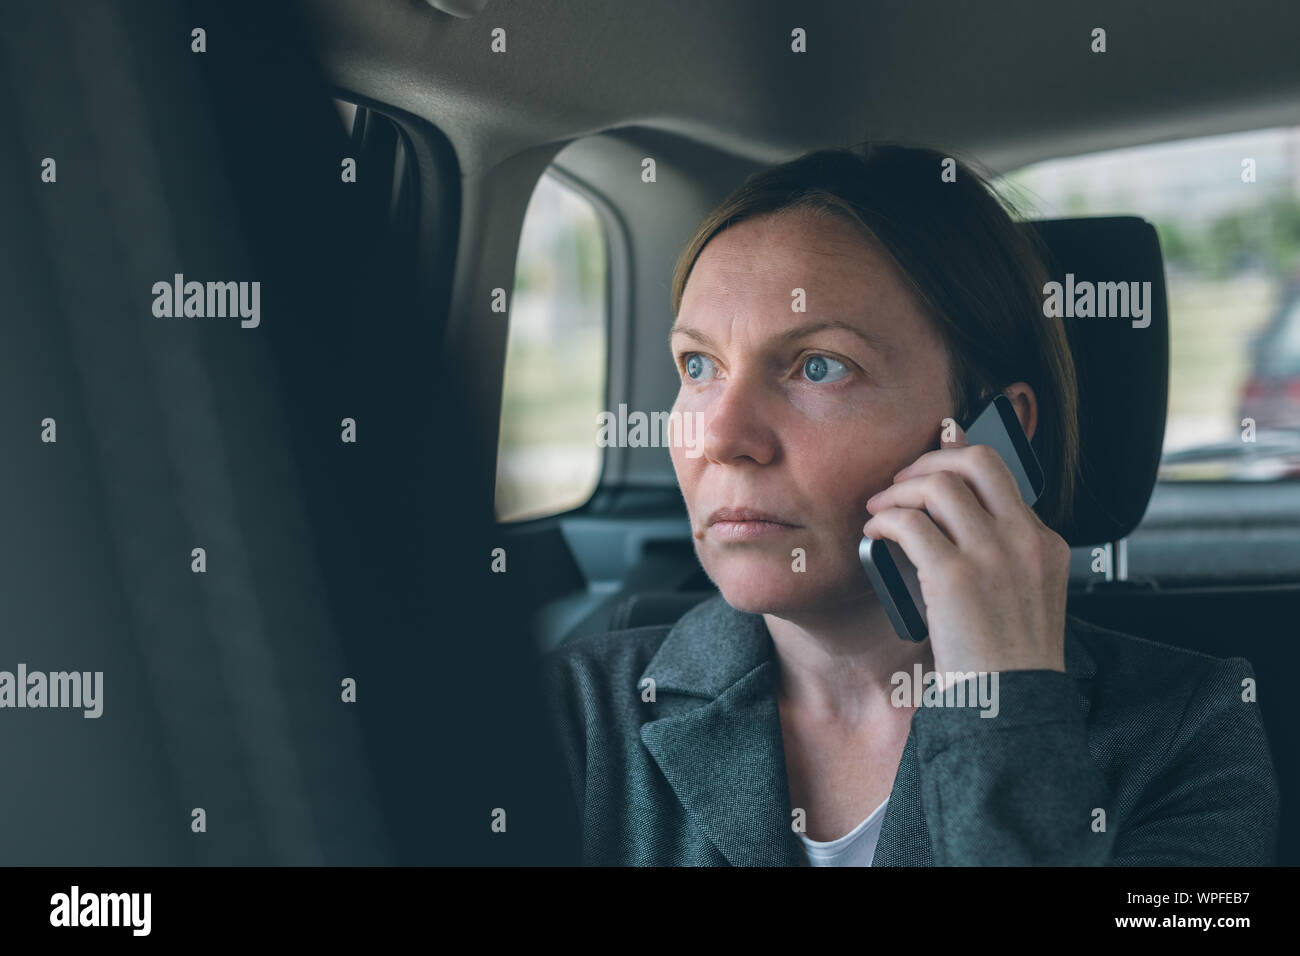 Doubtful businesswoman talking on mobile phone on car back seat, business on the move concept. Elegant adult caucasian female person using smartphone Stock Photo